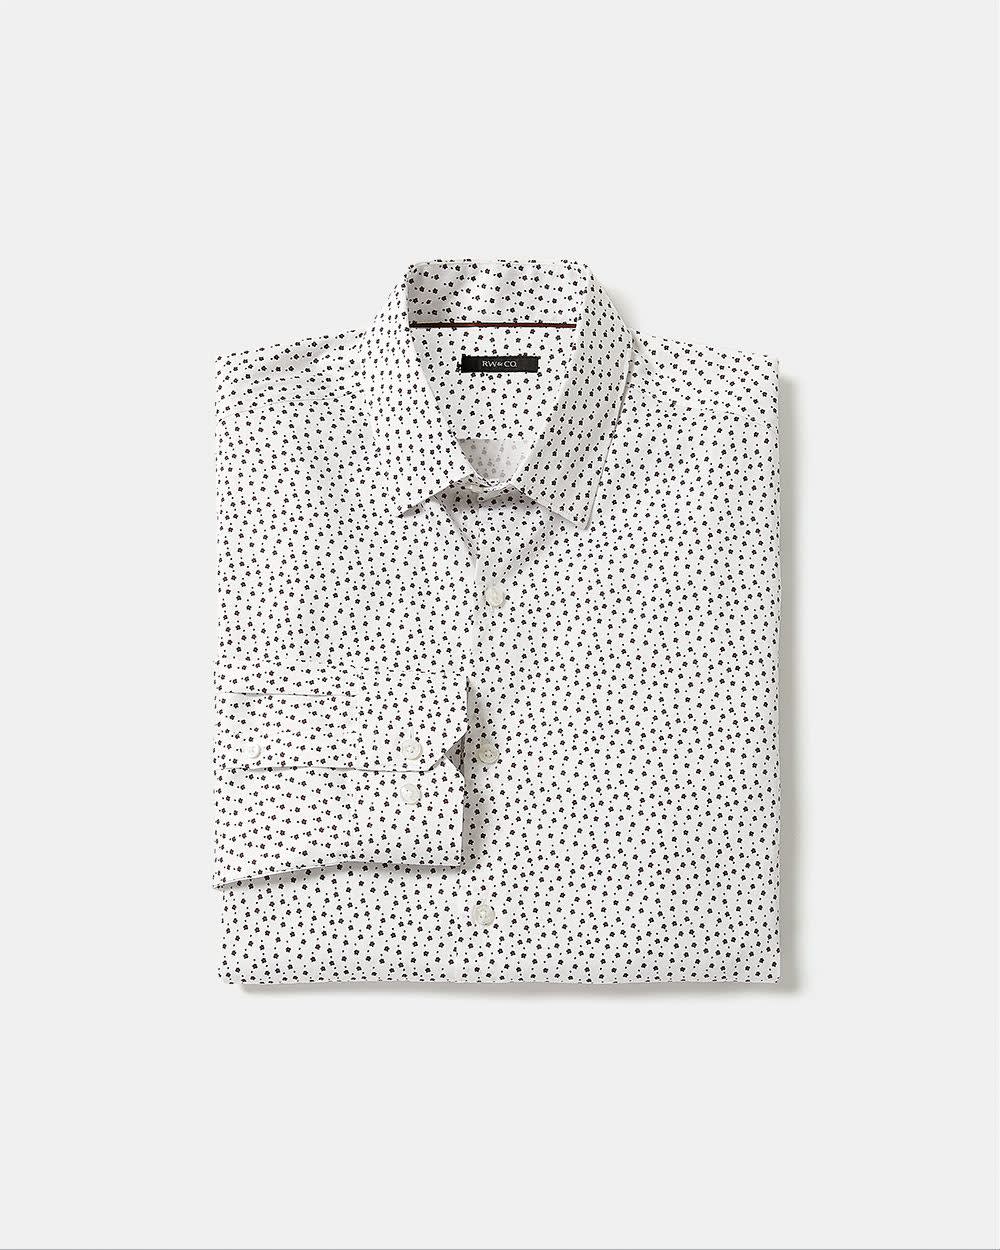 Slim-Fit White Dress Shirt with Floral Pattern | RW&CO.